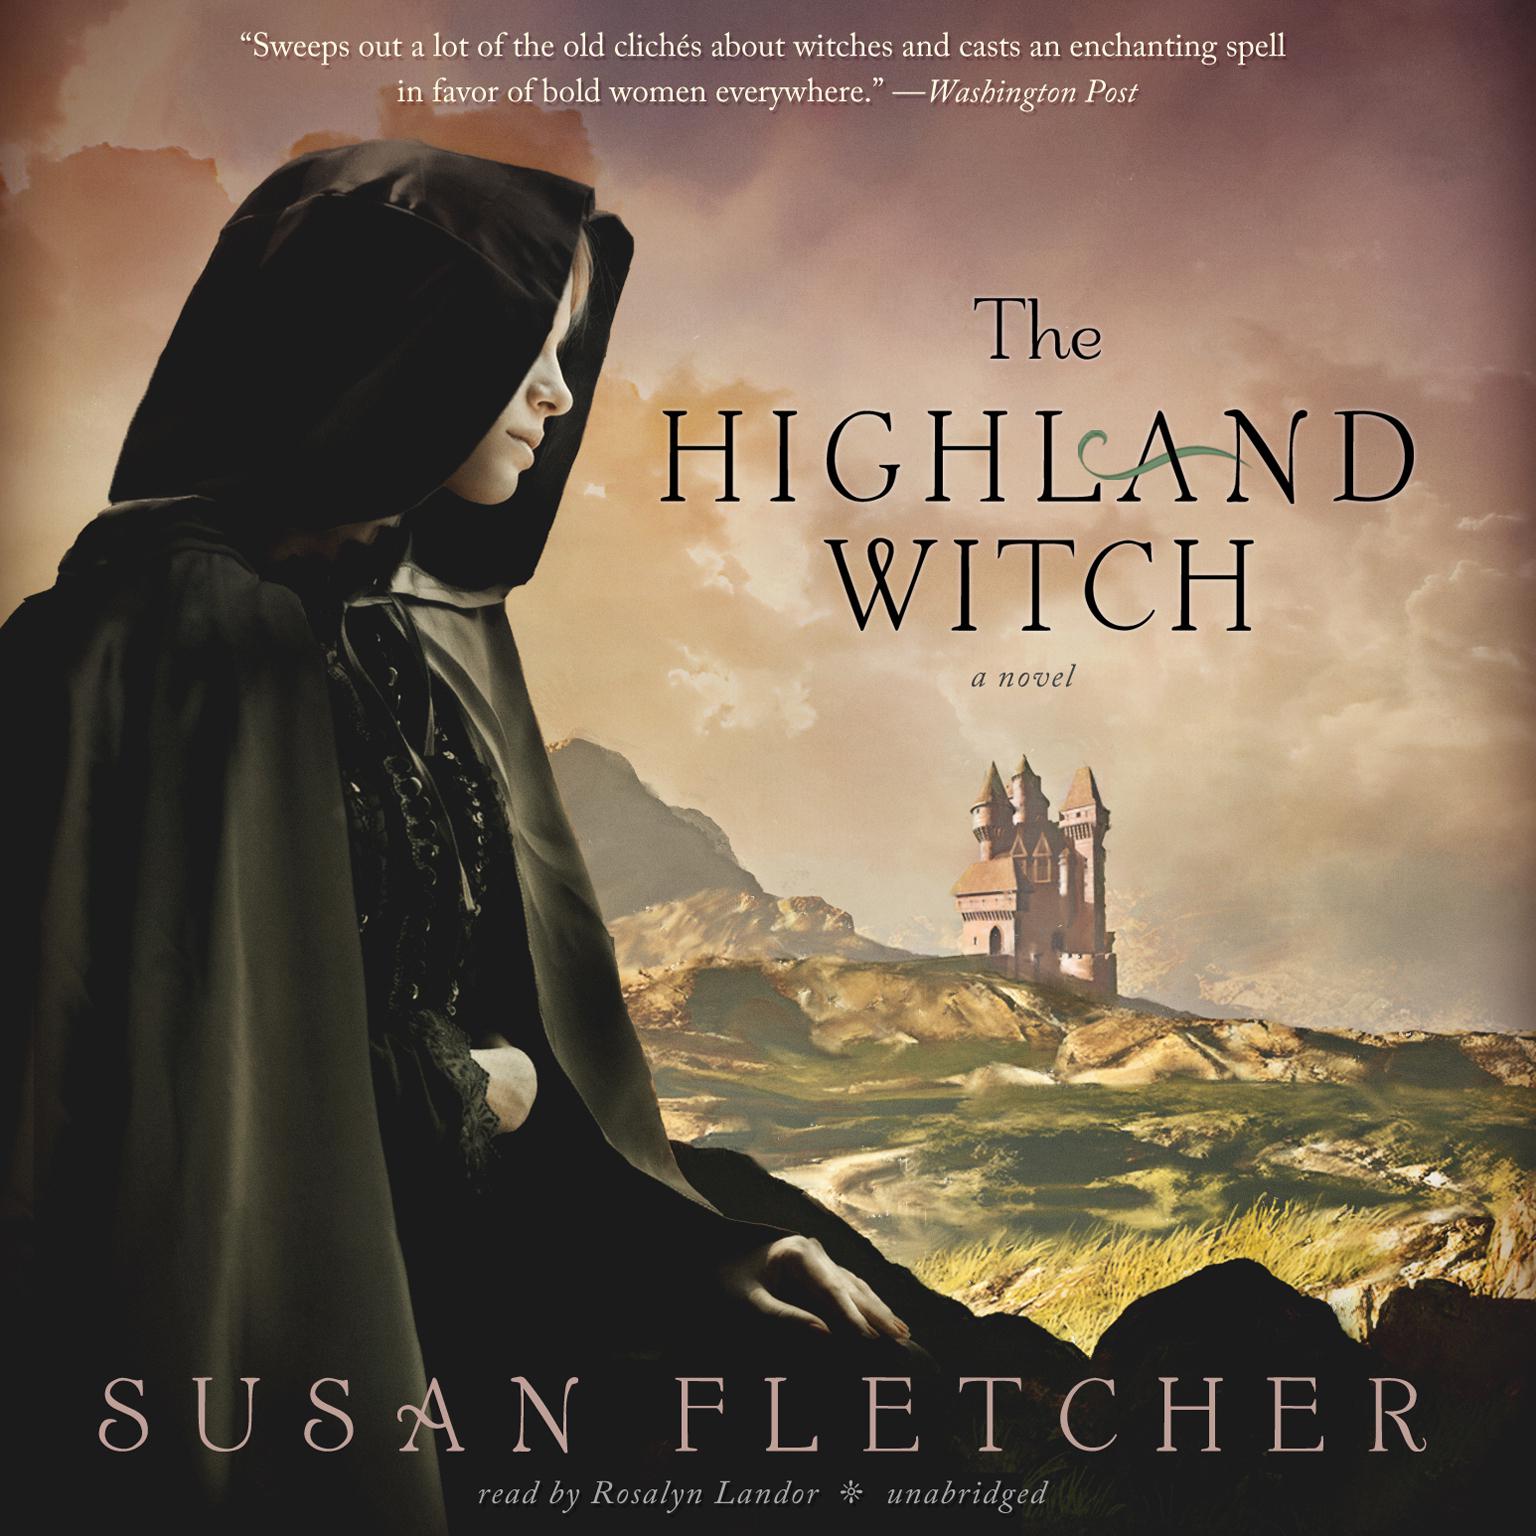 The Highland Witch Audiobook, by Susan Fletcher